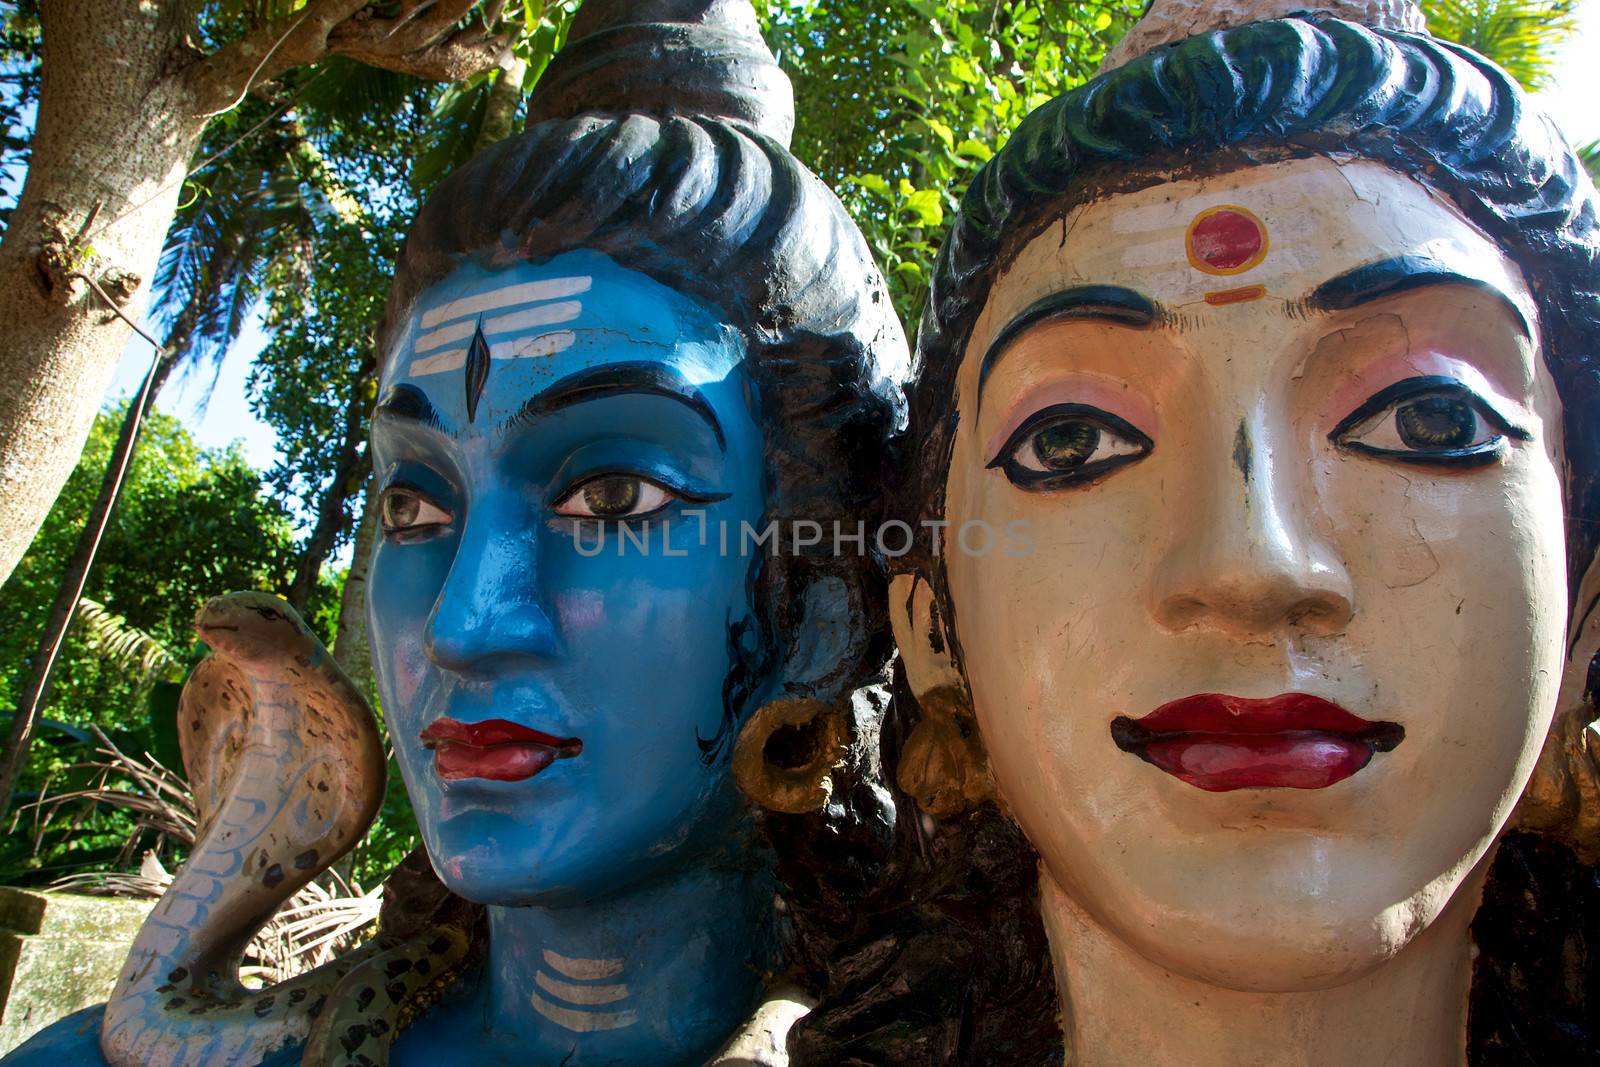 Head of Lord Shiva and his partner by watchtheworld